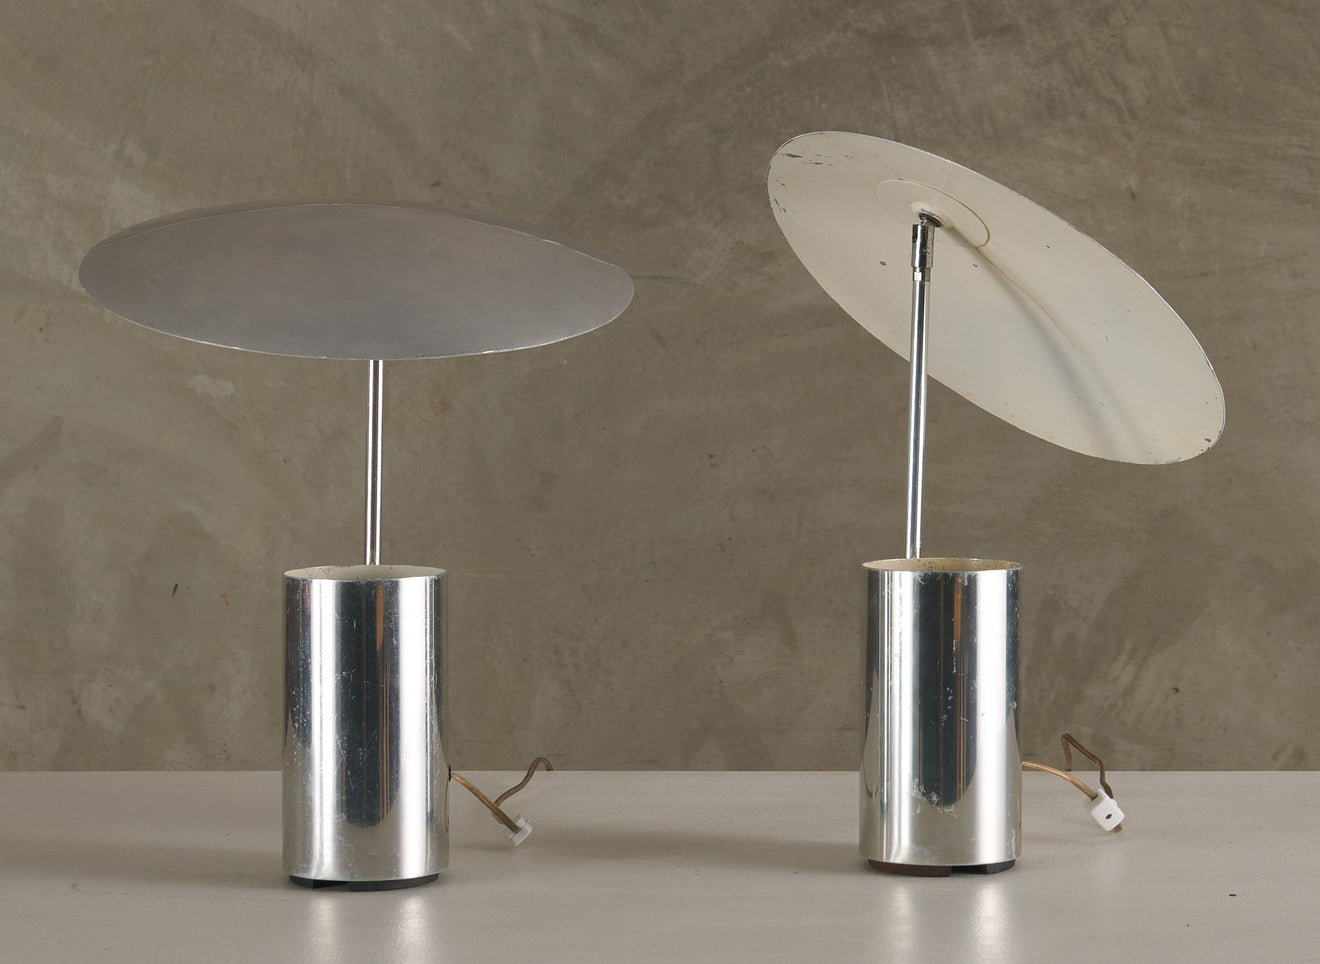 GEORGE NELSON (1908-1986) PAIR OF HALF NELSON TABLE LAMPS BY KOCH & LOWY